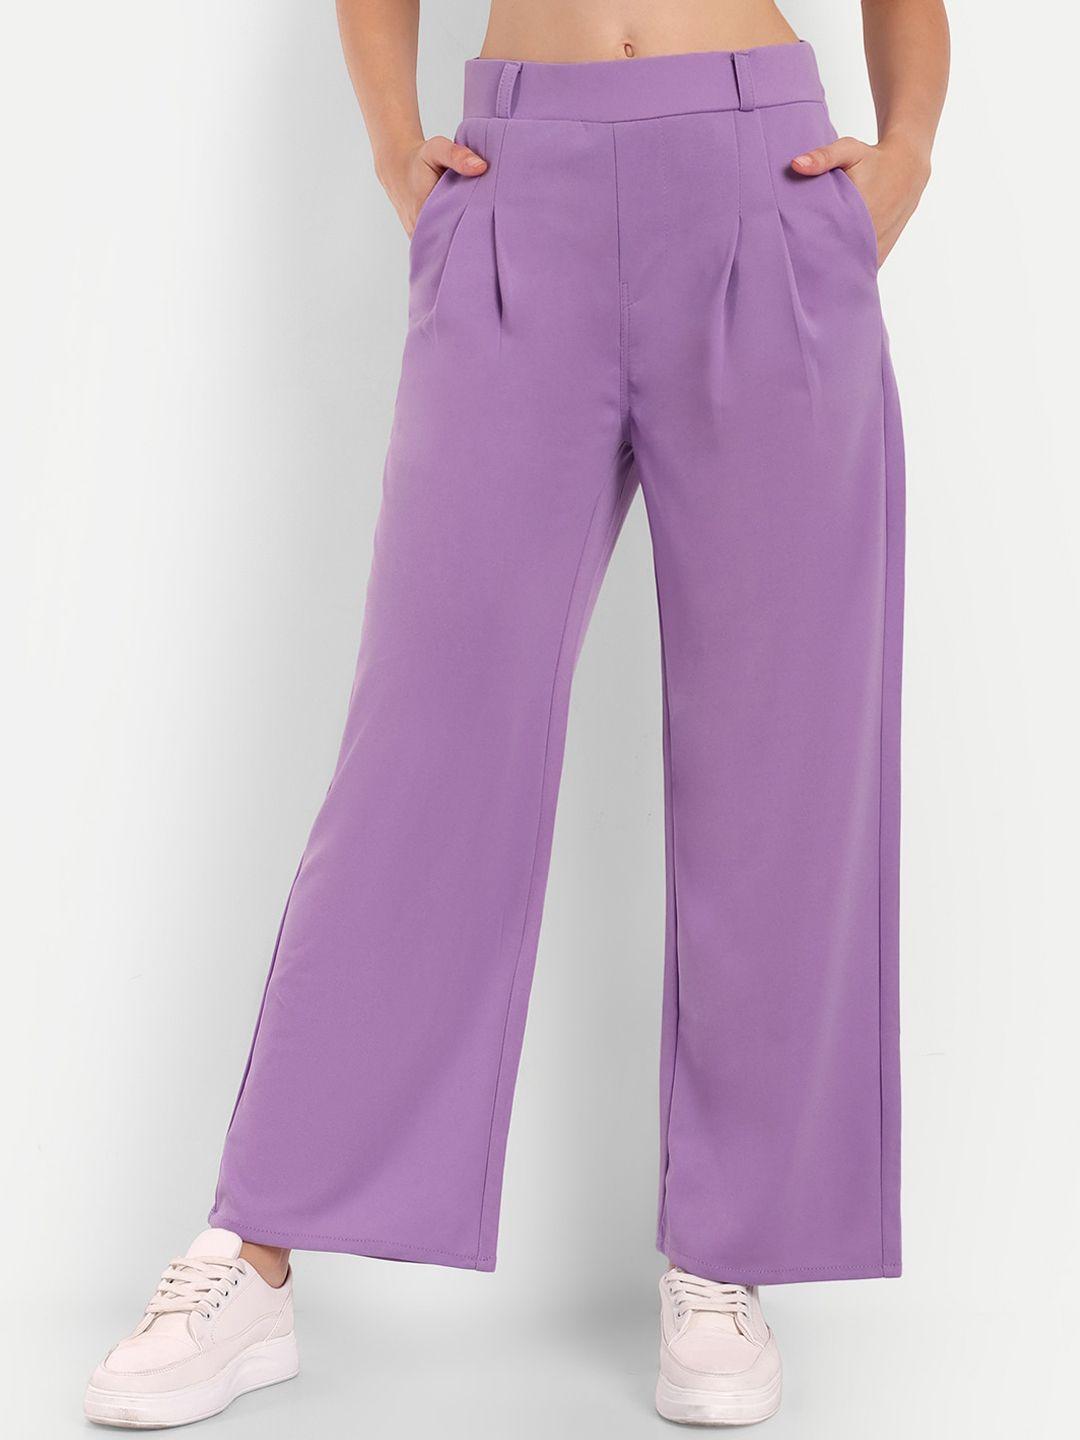 broadstar-women-smart-loose-fit-high-rise-easy-wash-pleated-trousers